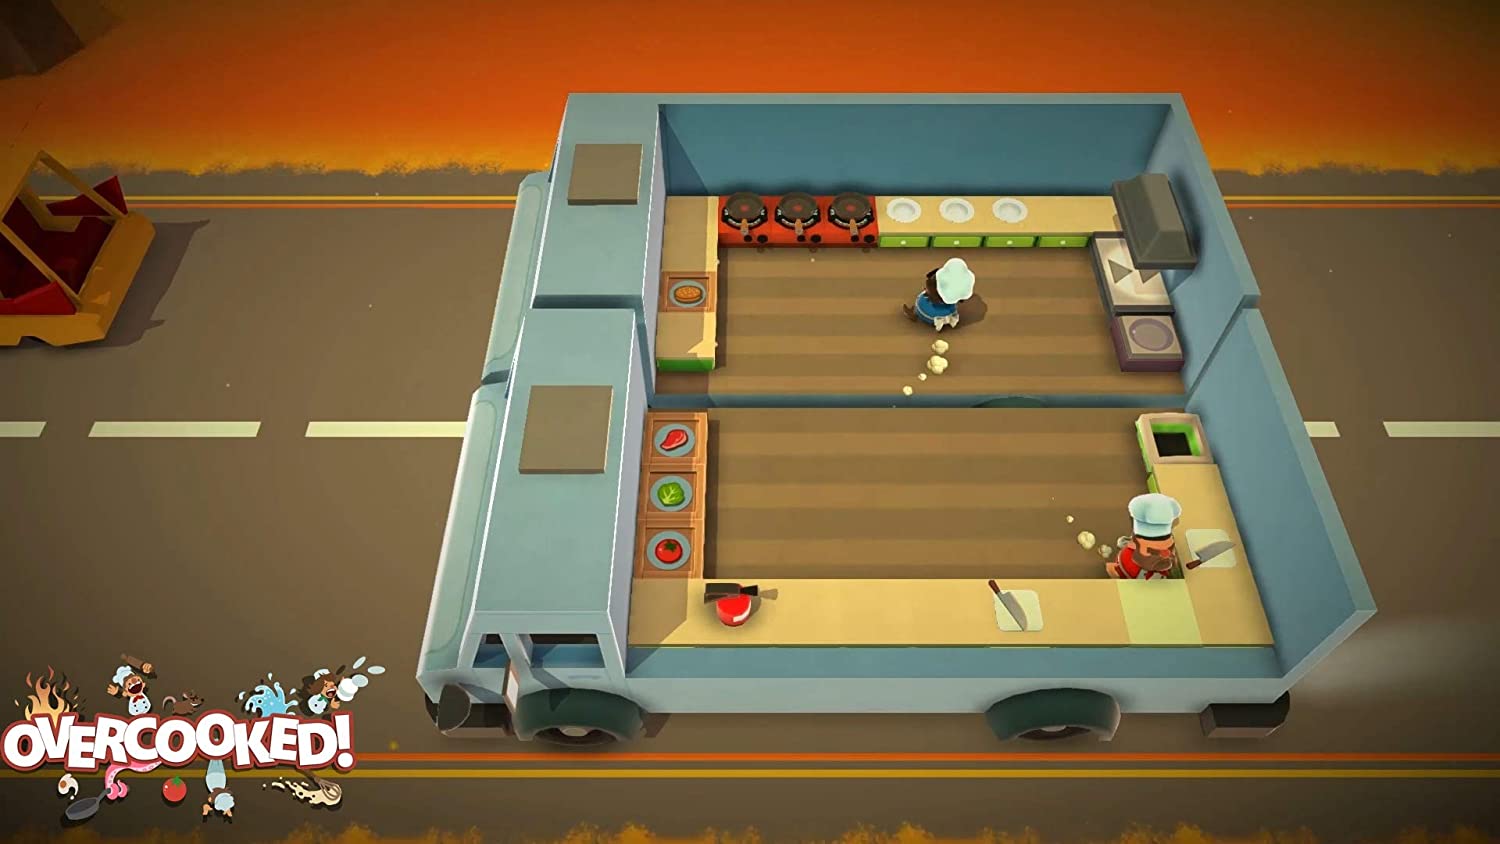 PS4 Overcooked: All You Can Eat